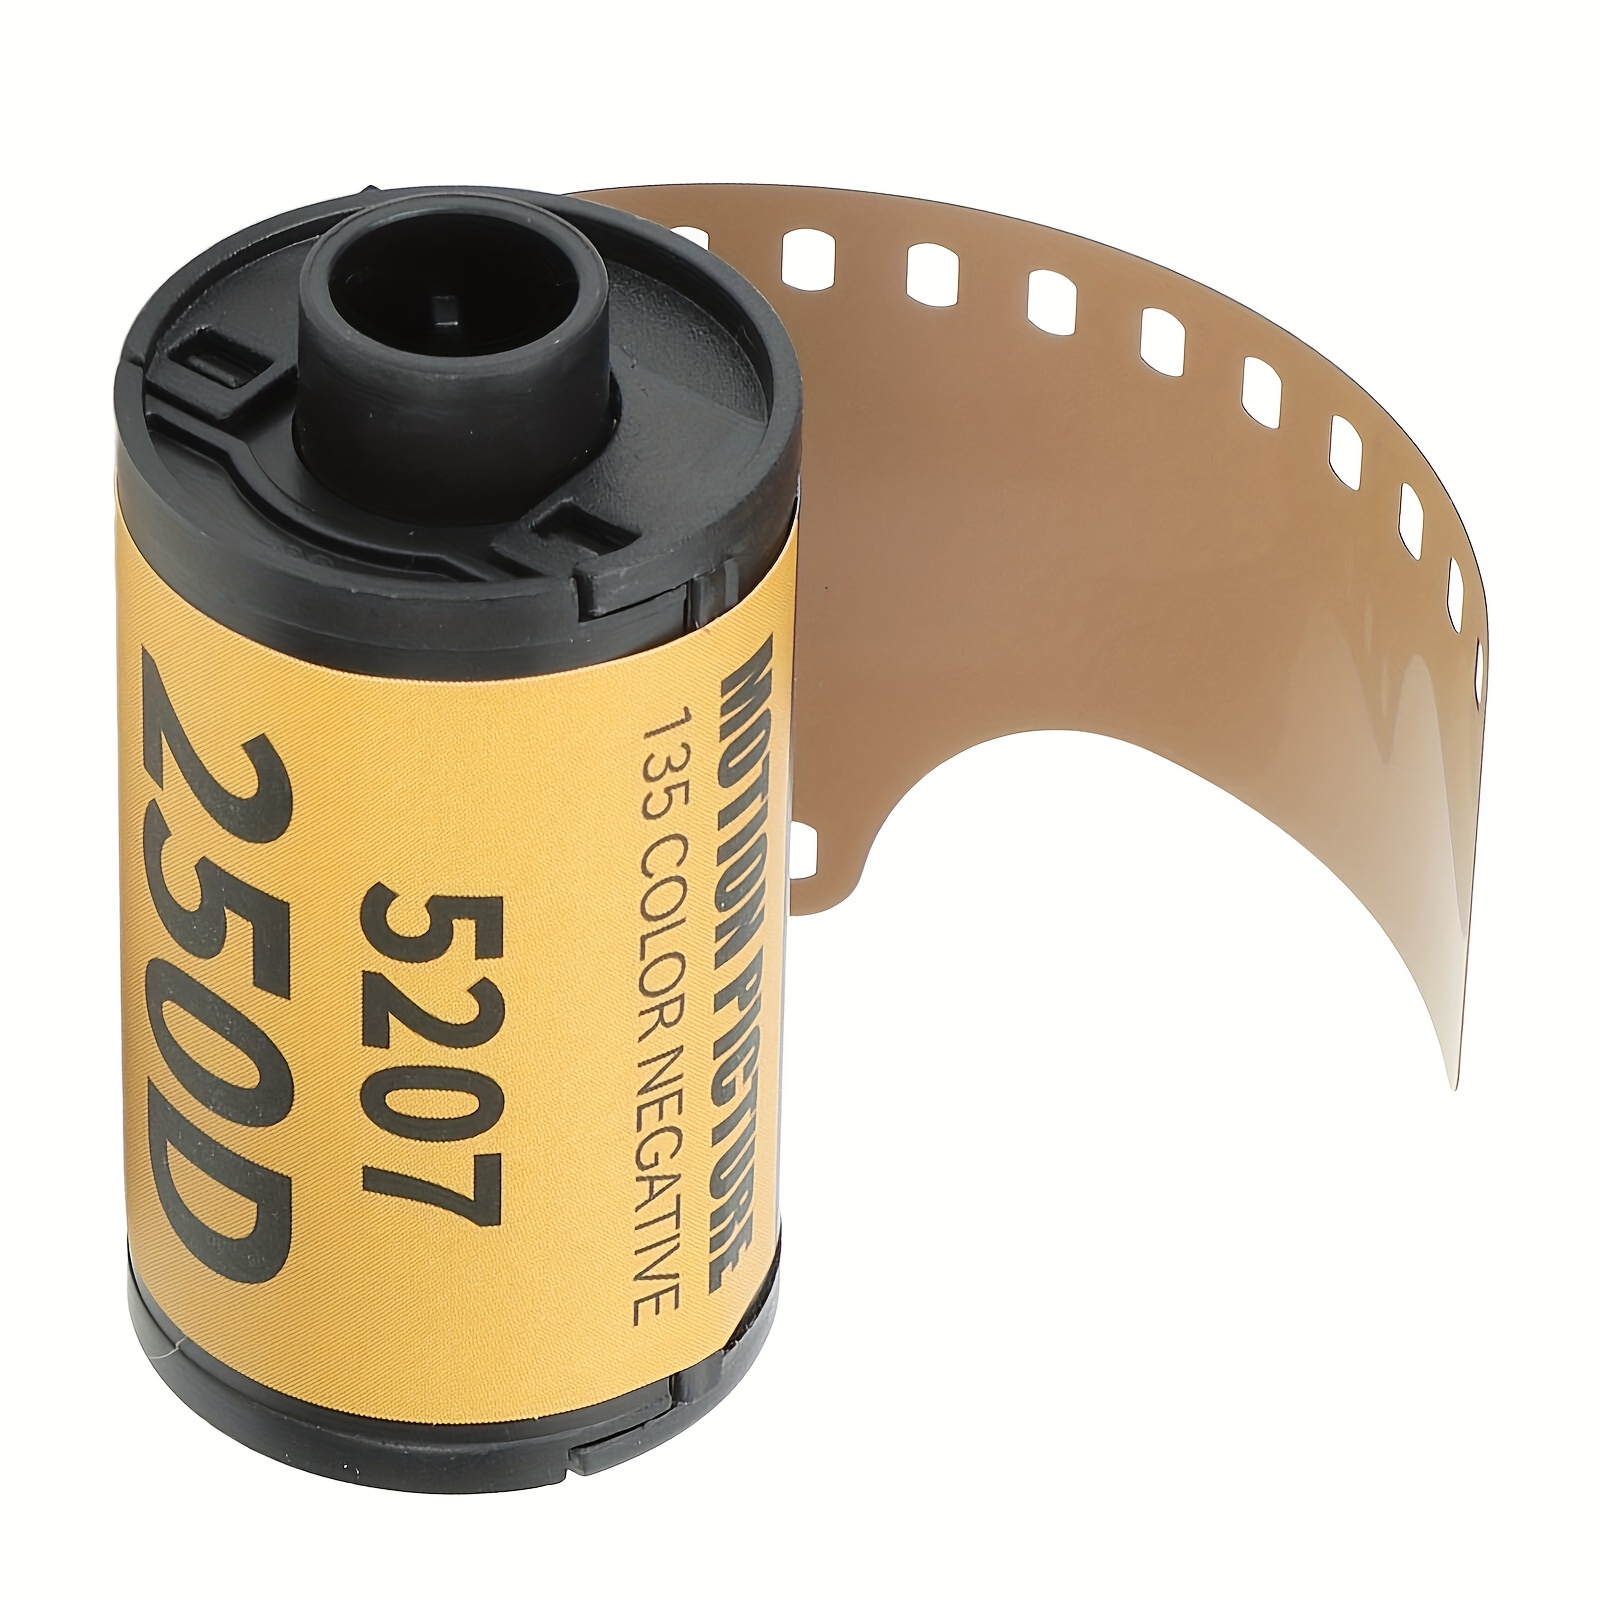 35 Mm Film Roll Kodak Film 35mm,8 Sheets Camera Color Film 35mm ISO200 High  Definition Wide Exposure High Contrast 135 Color Film for Photography